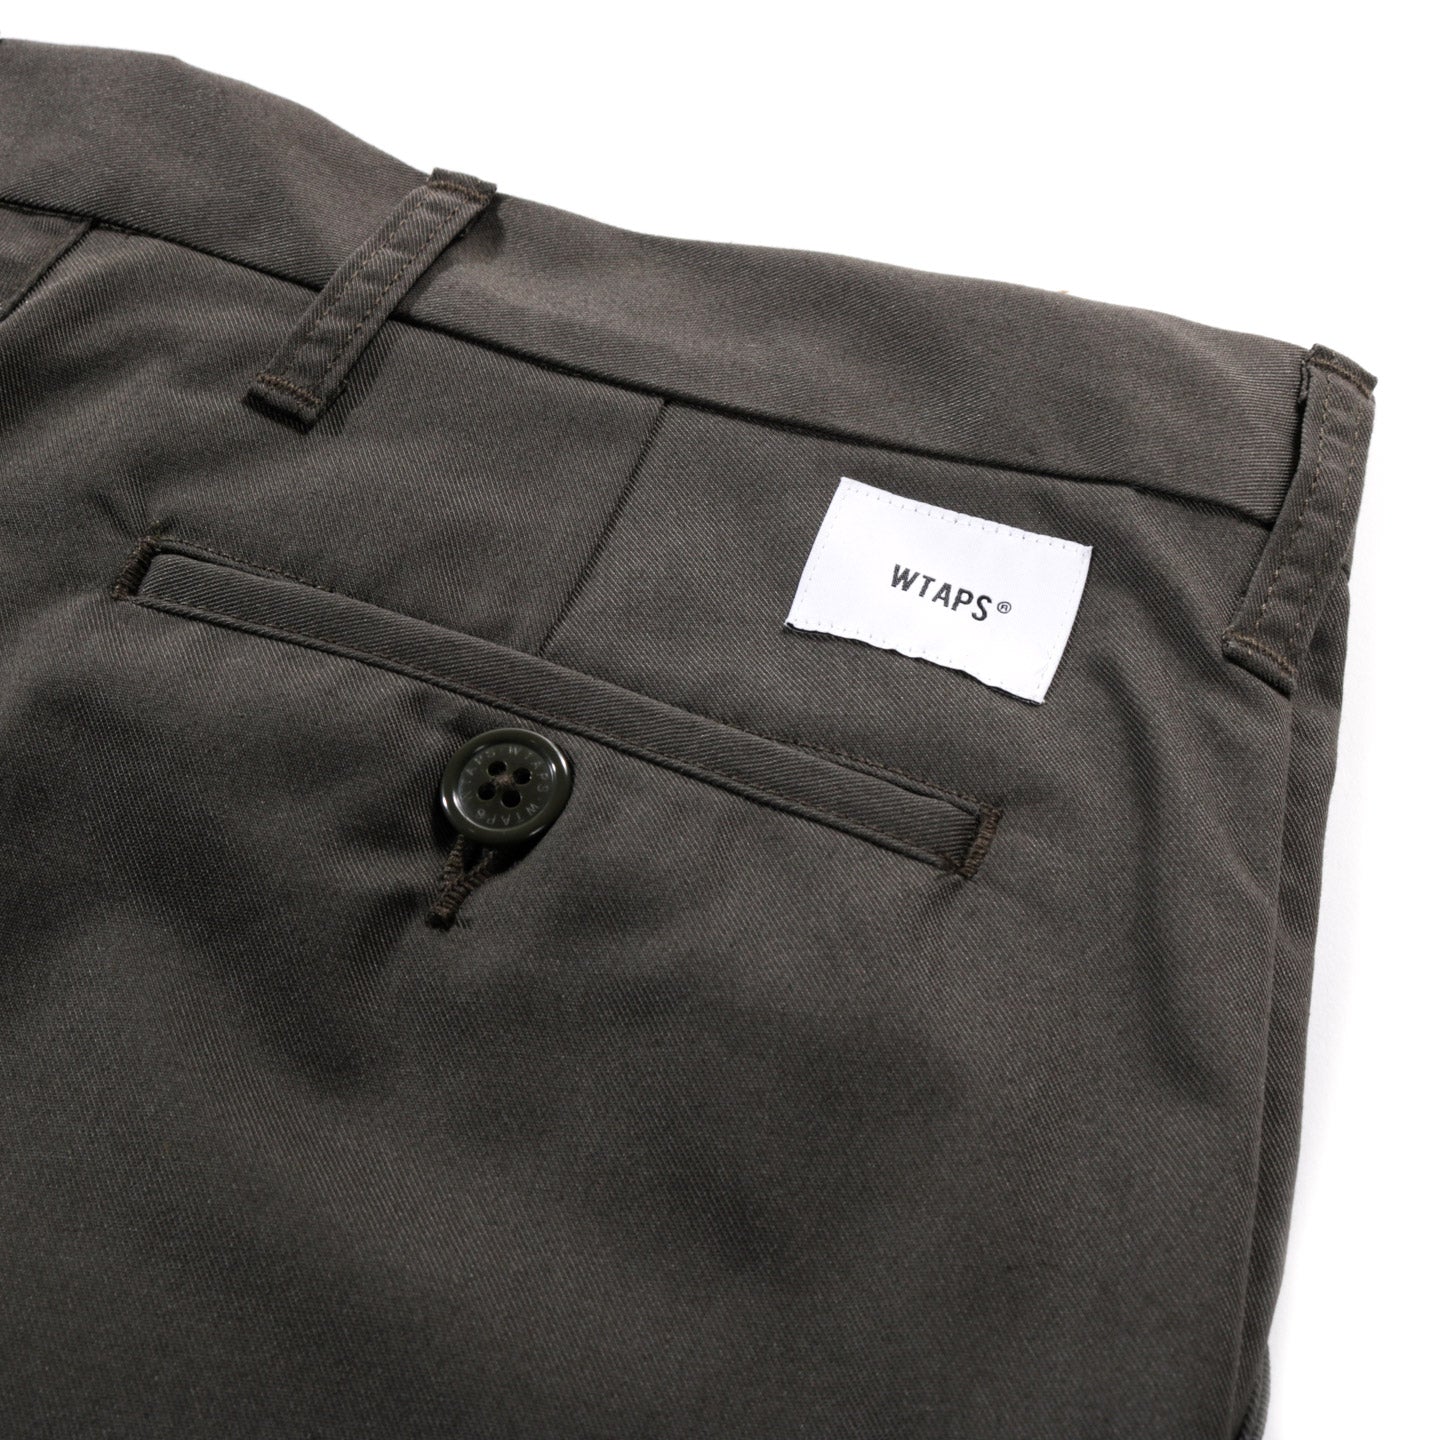 WTAPS CREASE TROUSERS OLIVE DRAB POLY COTTON TWILL